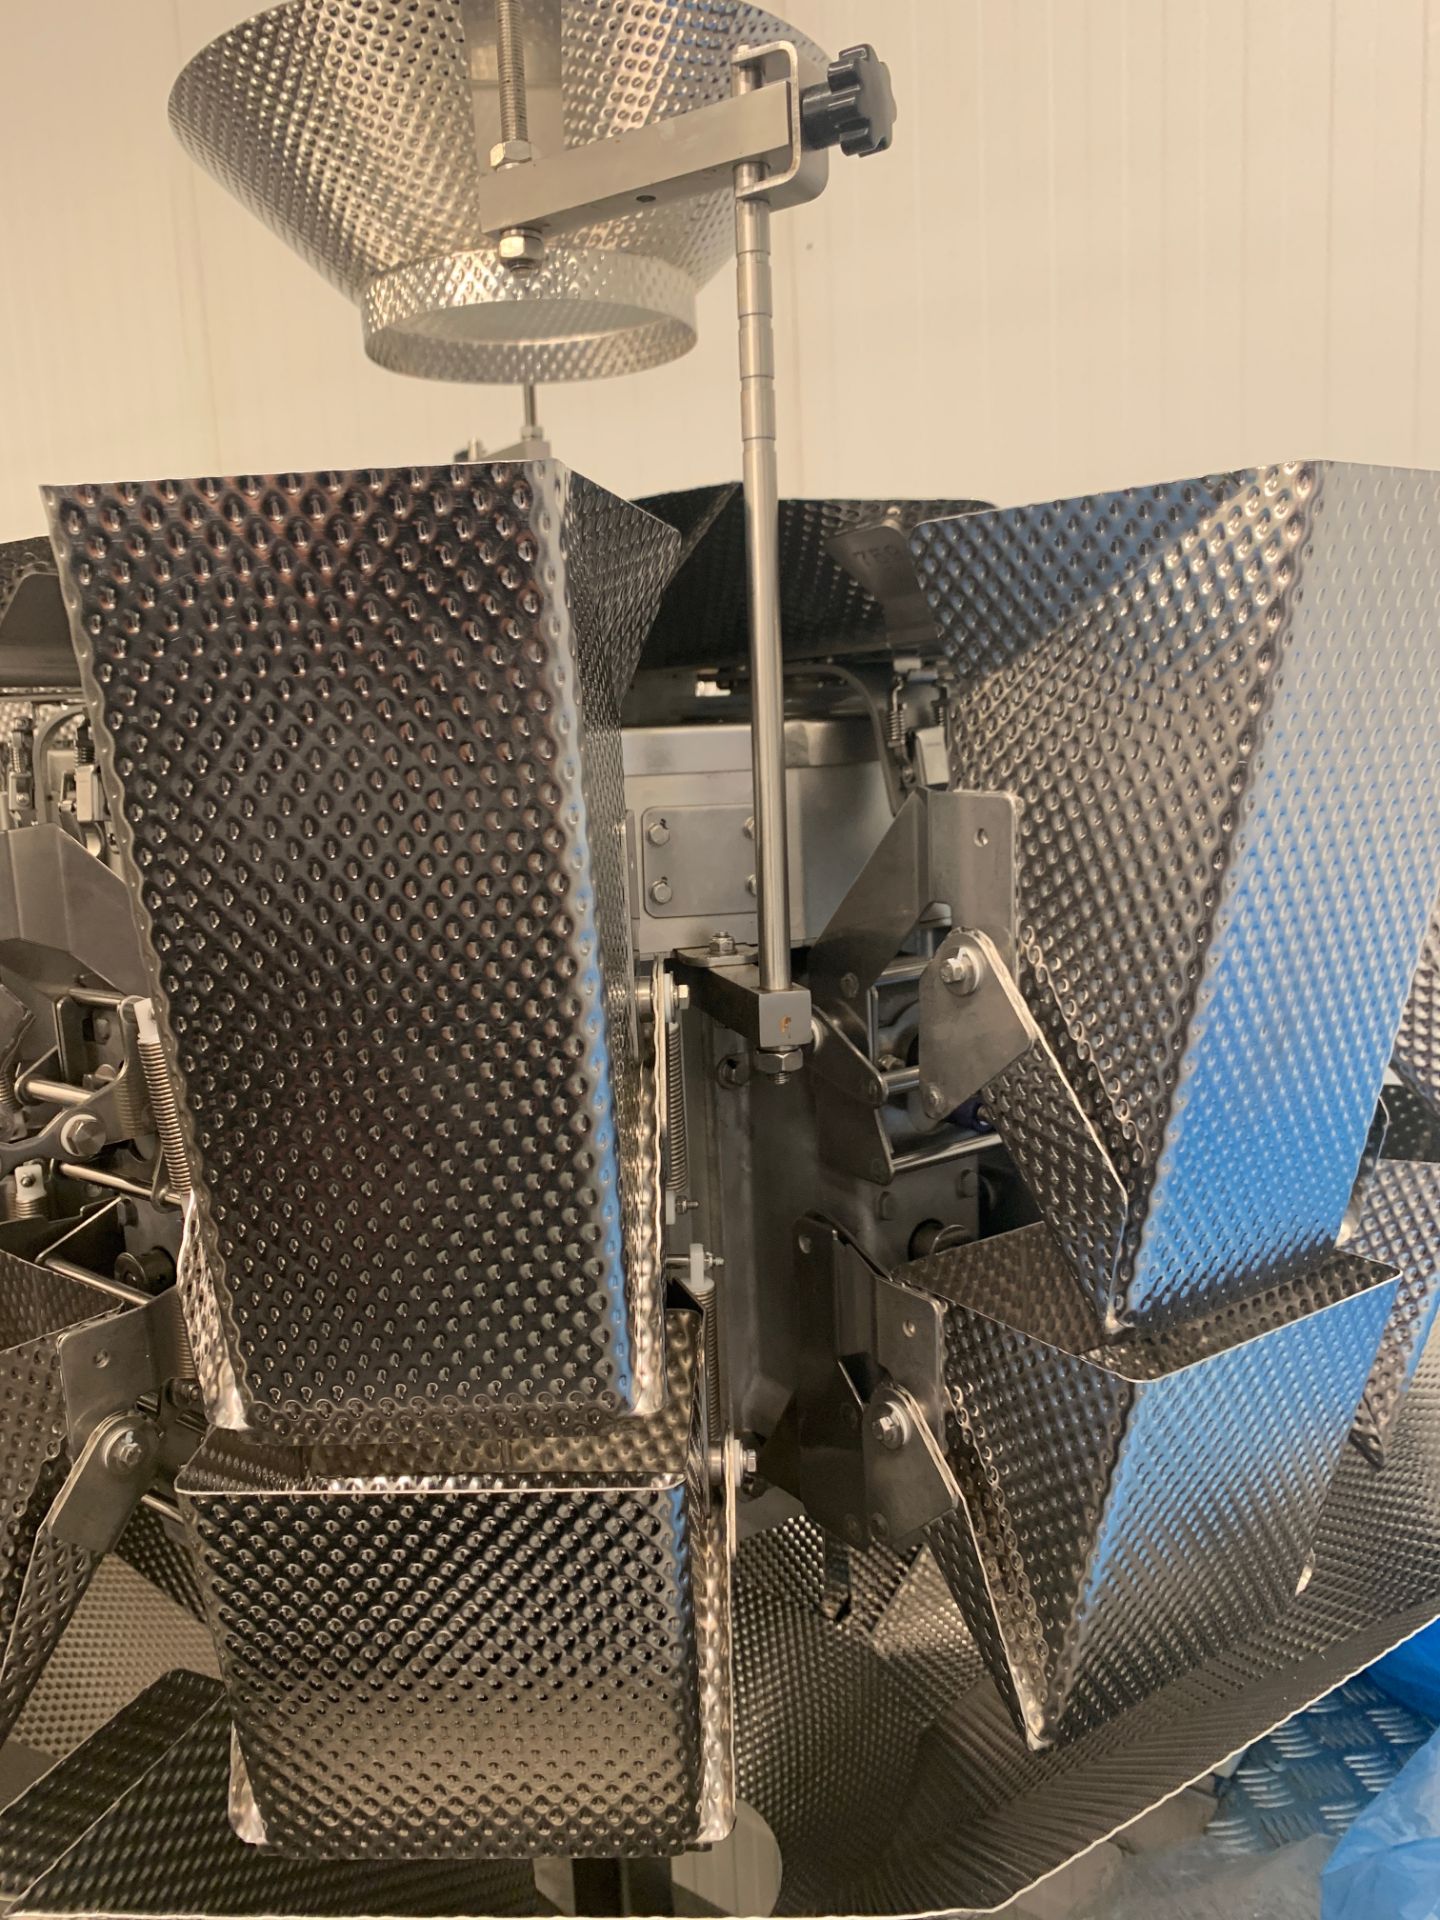 YAMATO 10 HEAD MULTI HEAD WEIGHER. COMPLETE WITH VIBRATORY HOOPER - Image 4 of 10